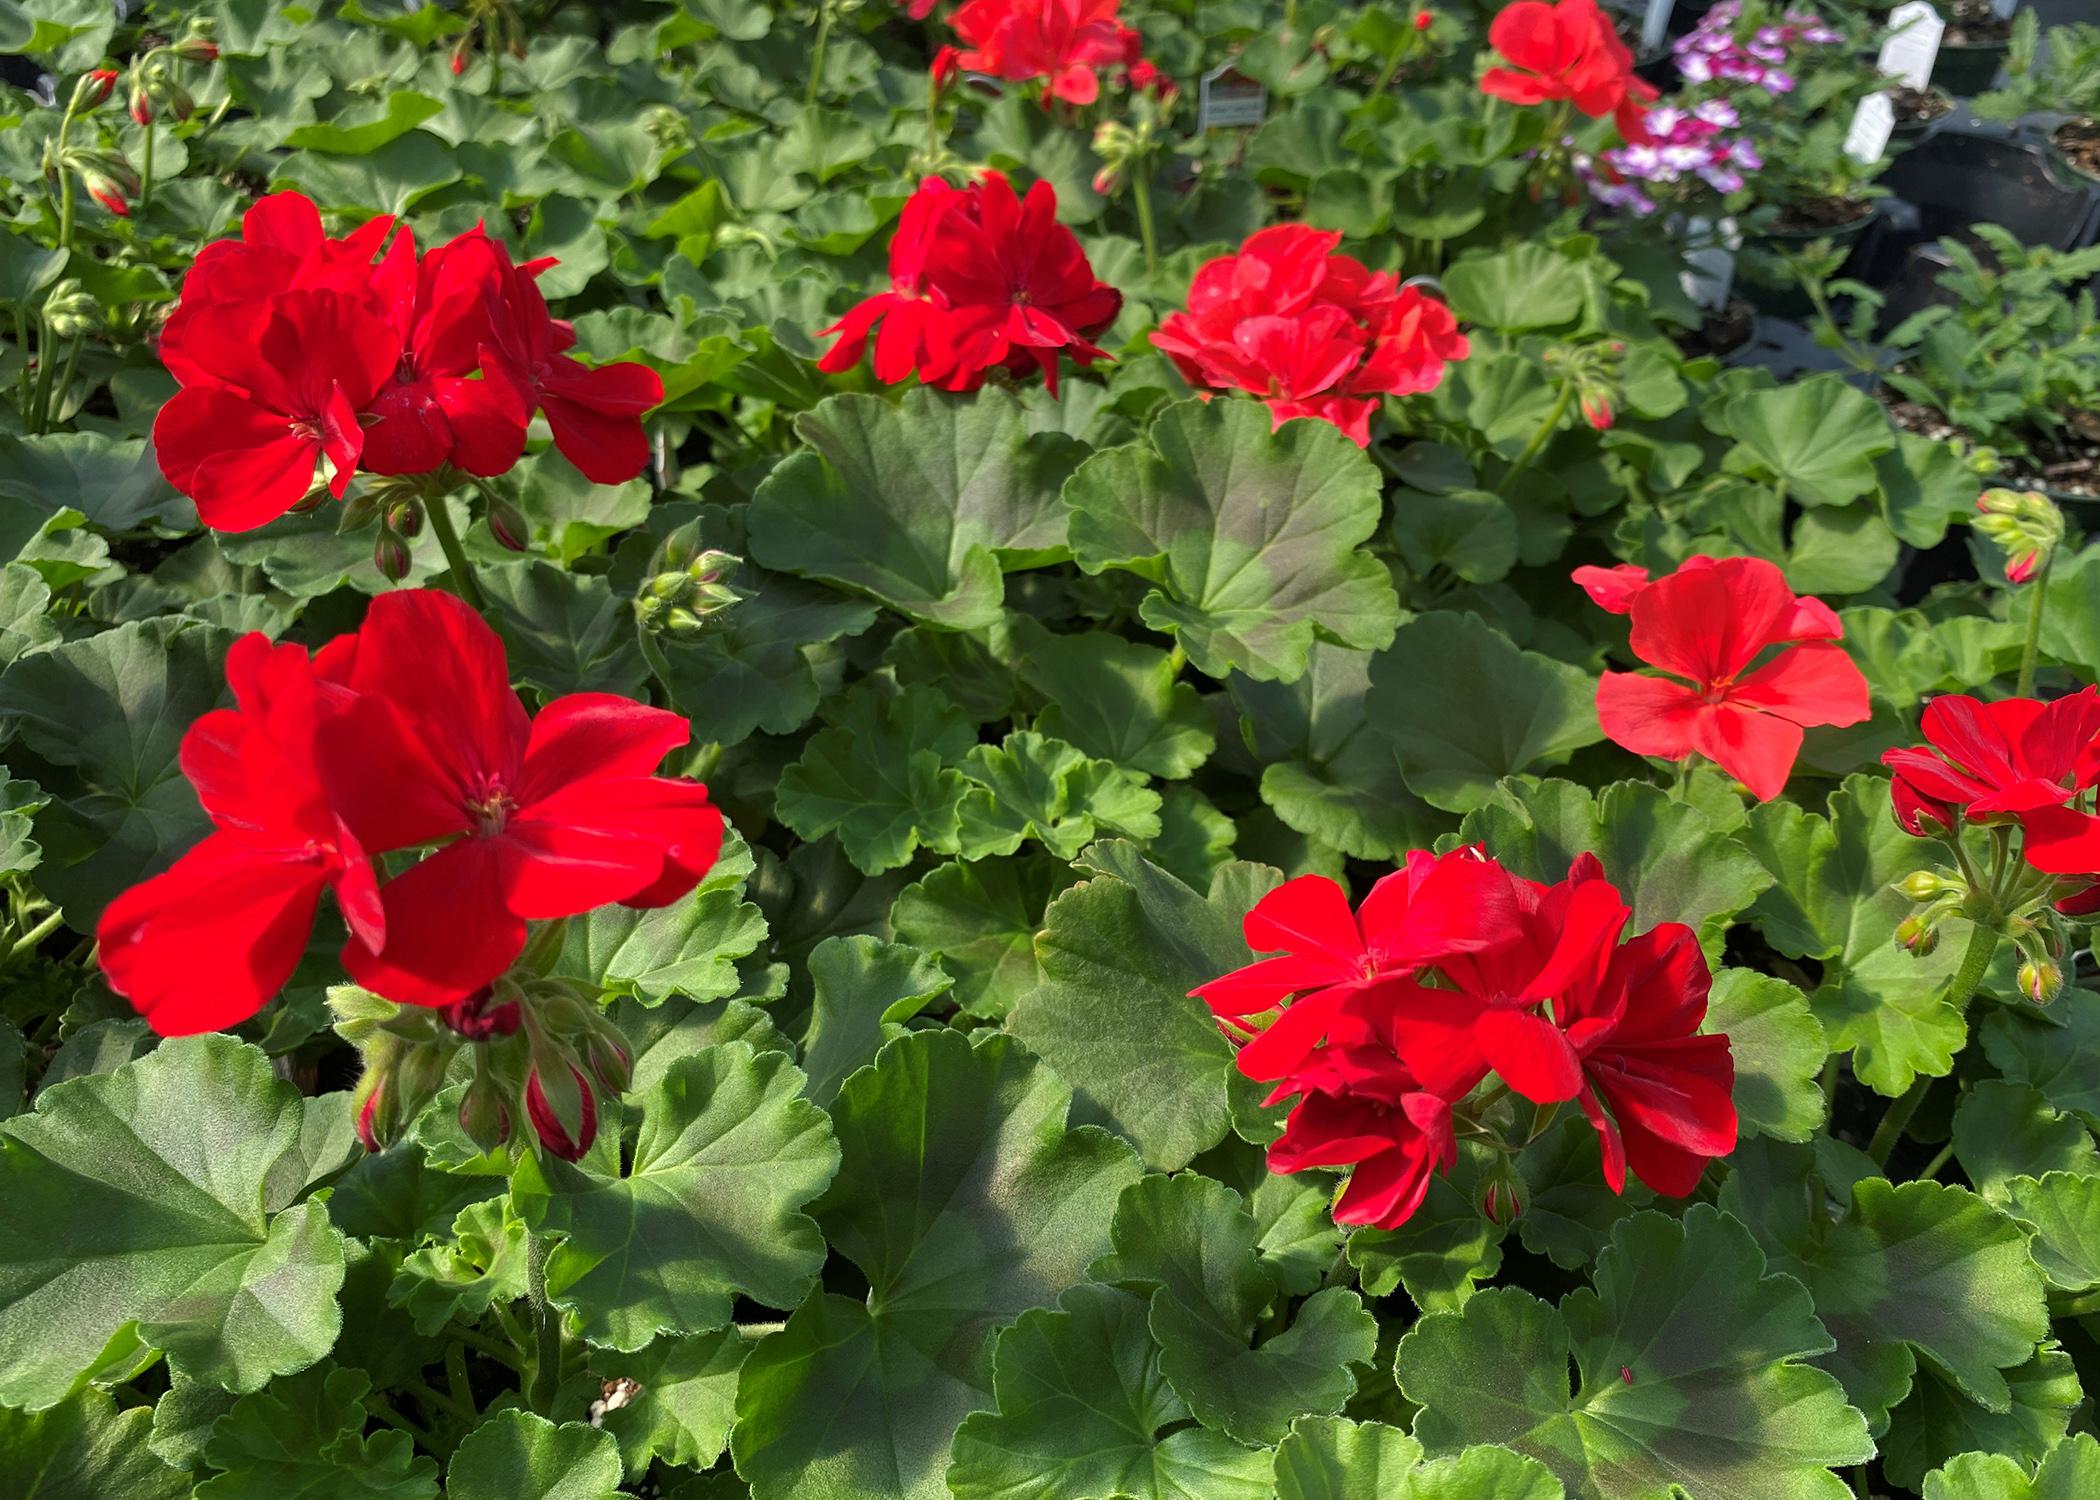 A cluster of red blooms is surrounded by green leaves.